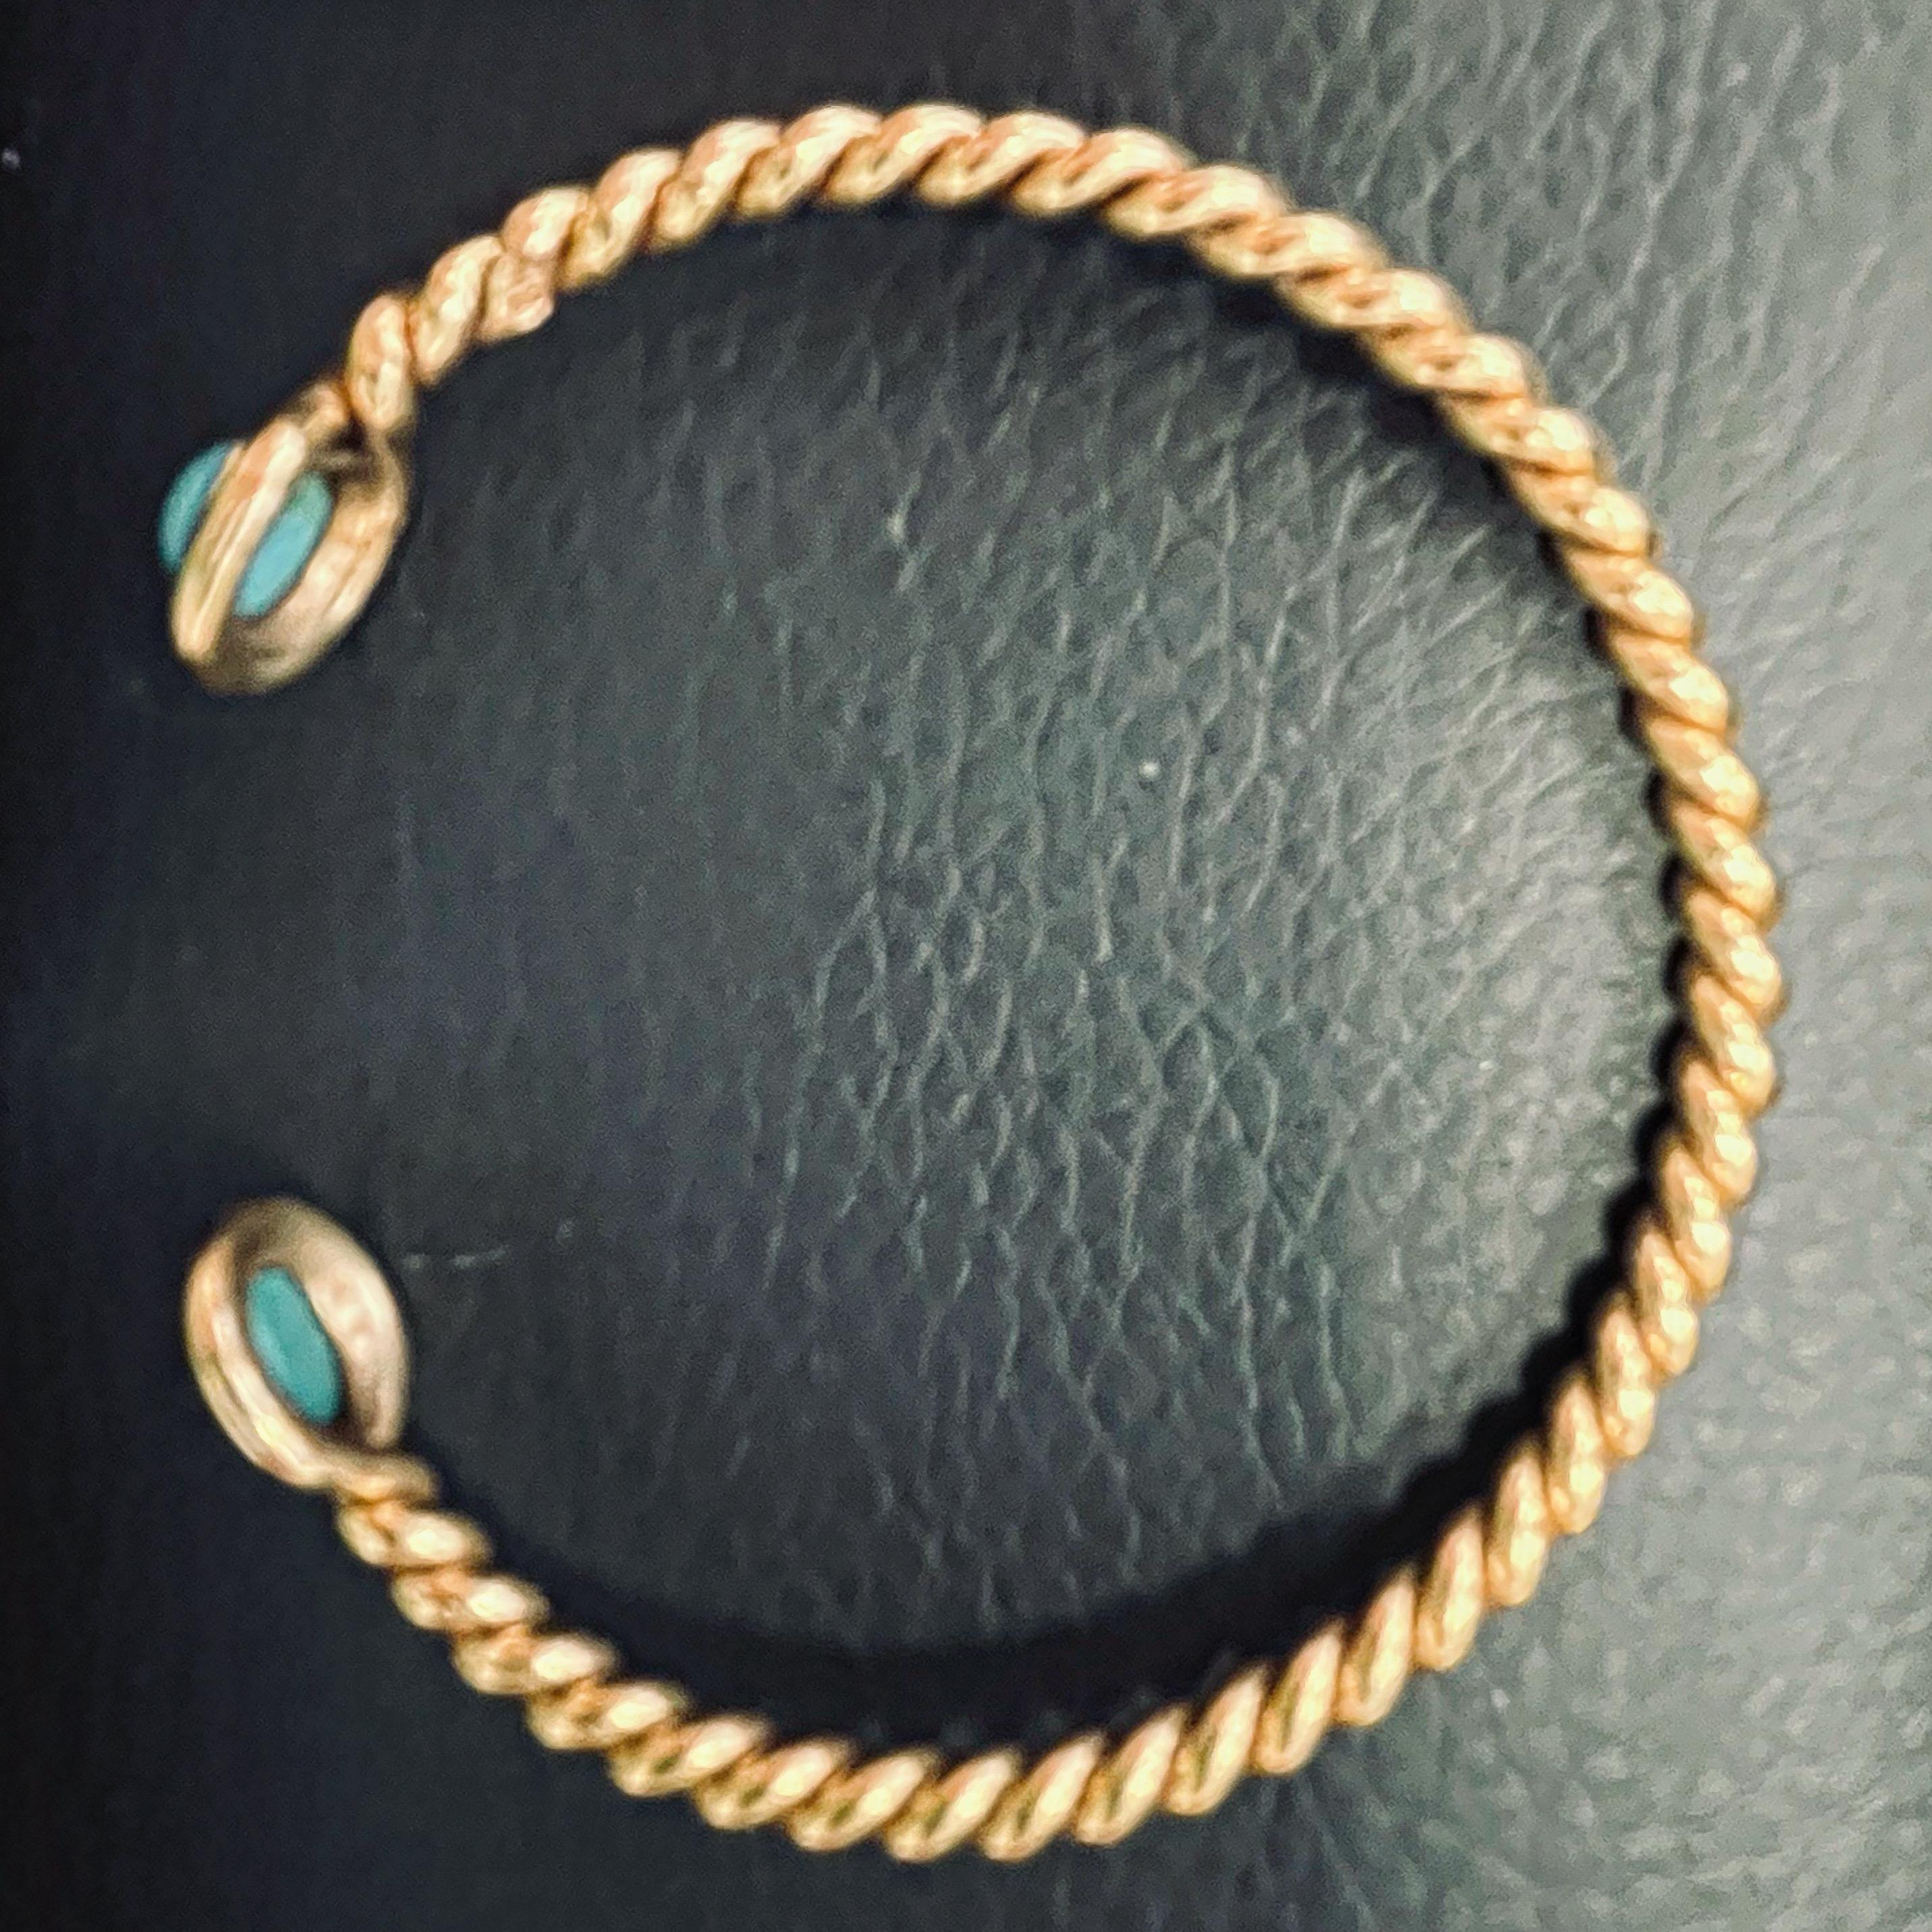 18 Carat Gold and Turquoise Bangle Bracelet, 16cm Circumference, circa 1970s In Excellent Condition For Sale In London, GB